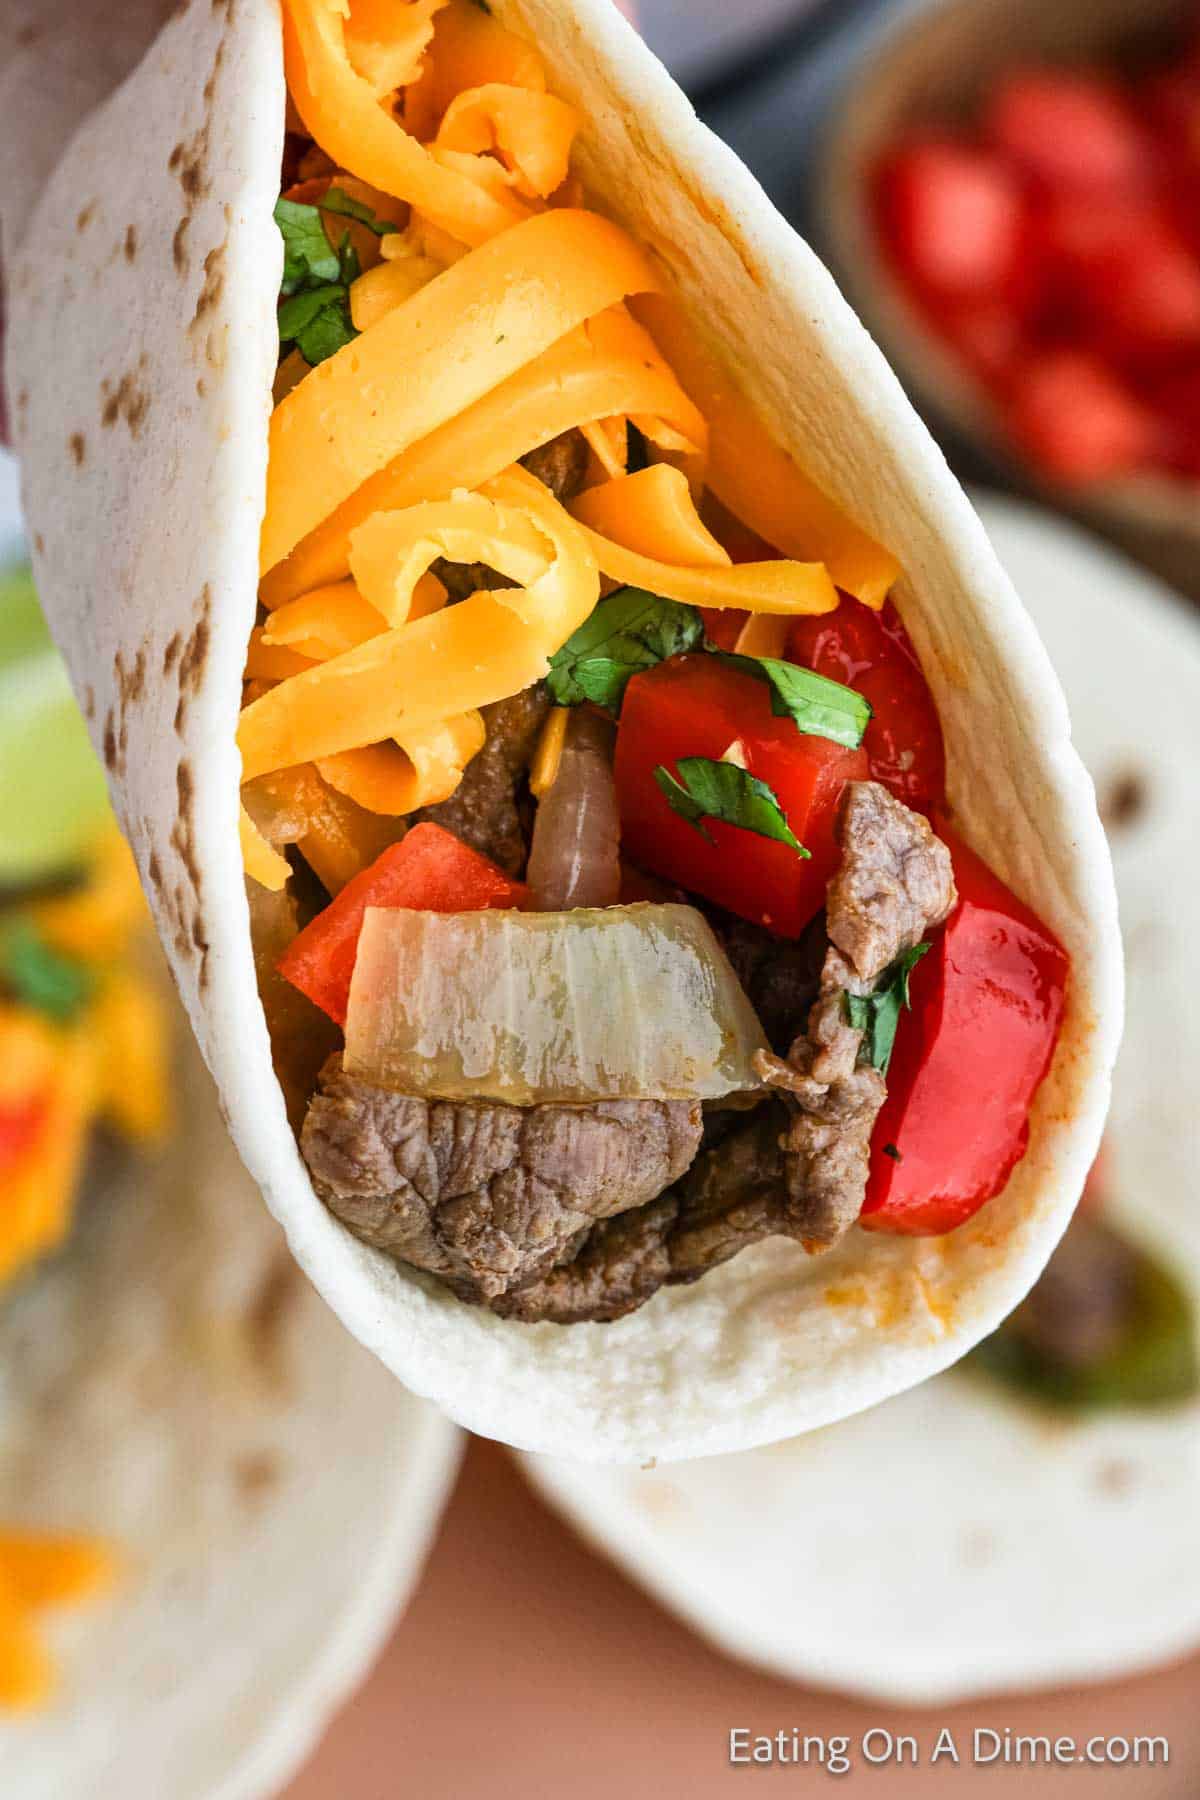 Steak fajitas with shredded cheese wrapped in a flour tortilla